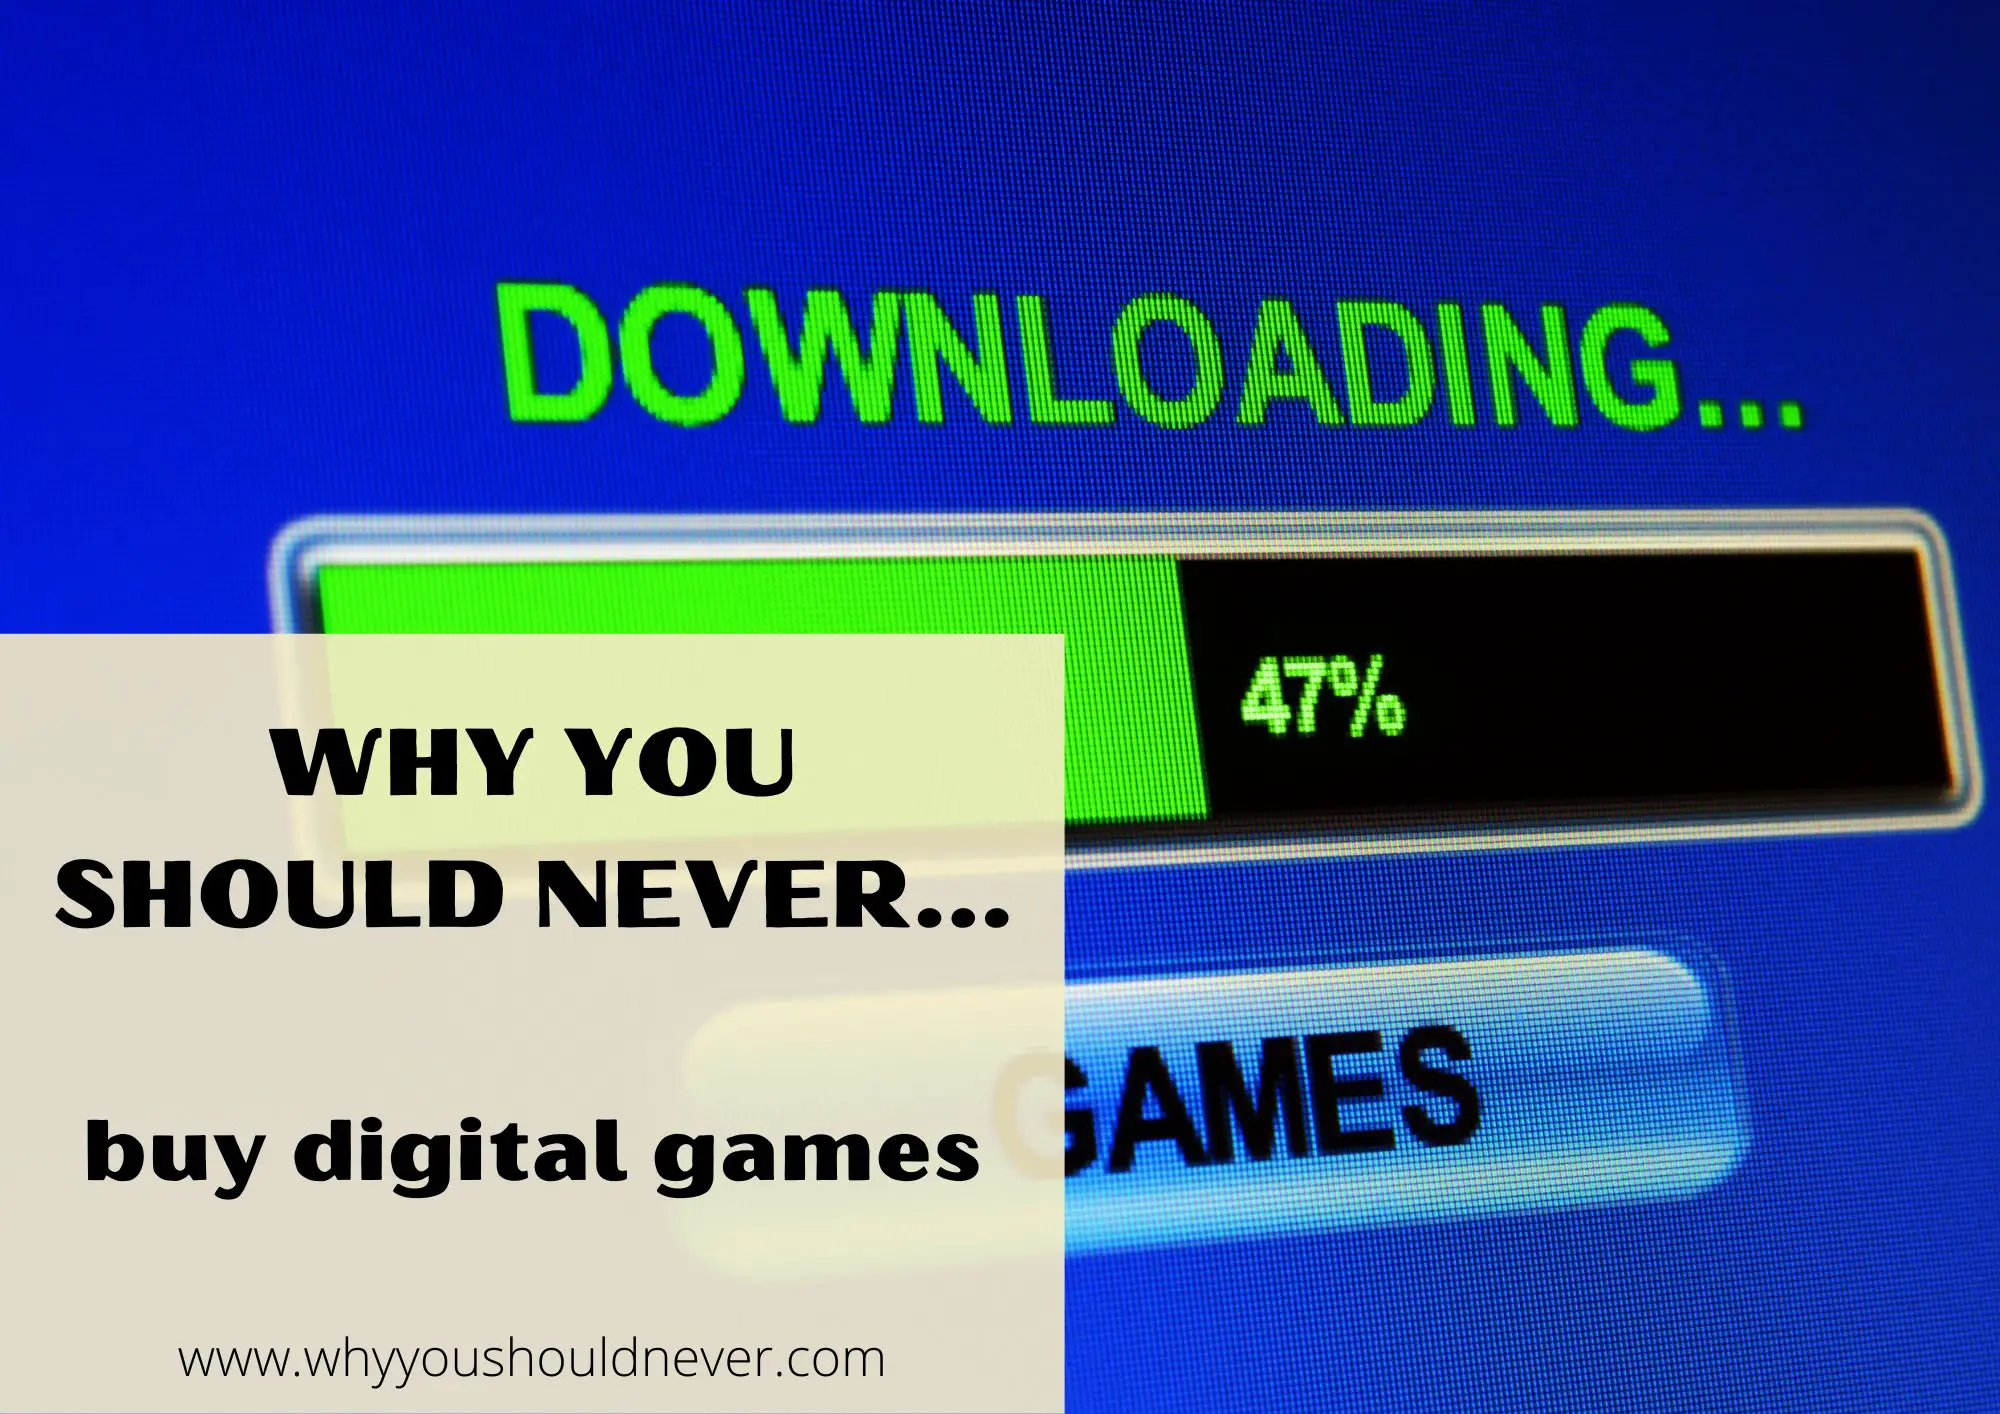 Why You Should Never Buy Digital Games